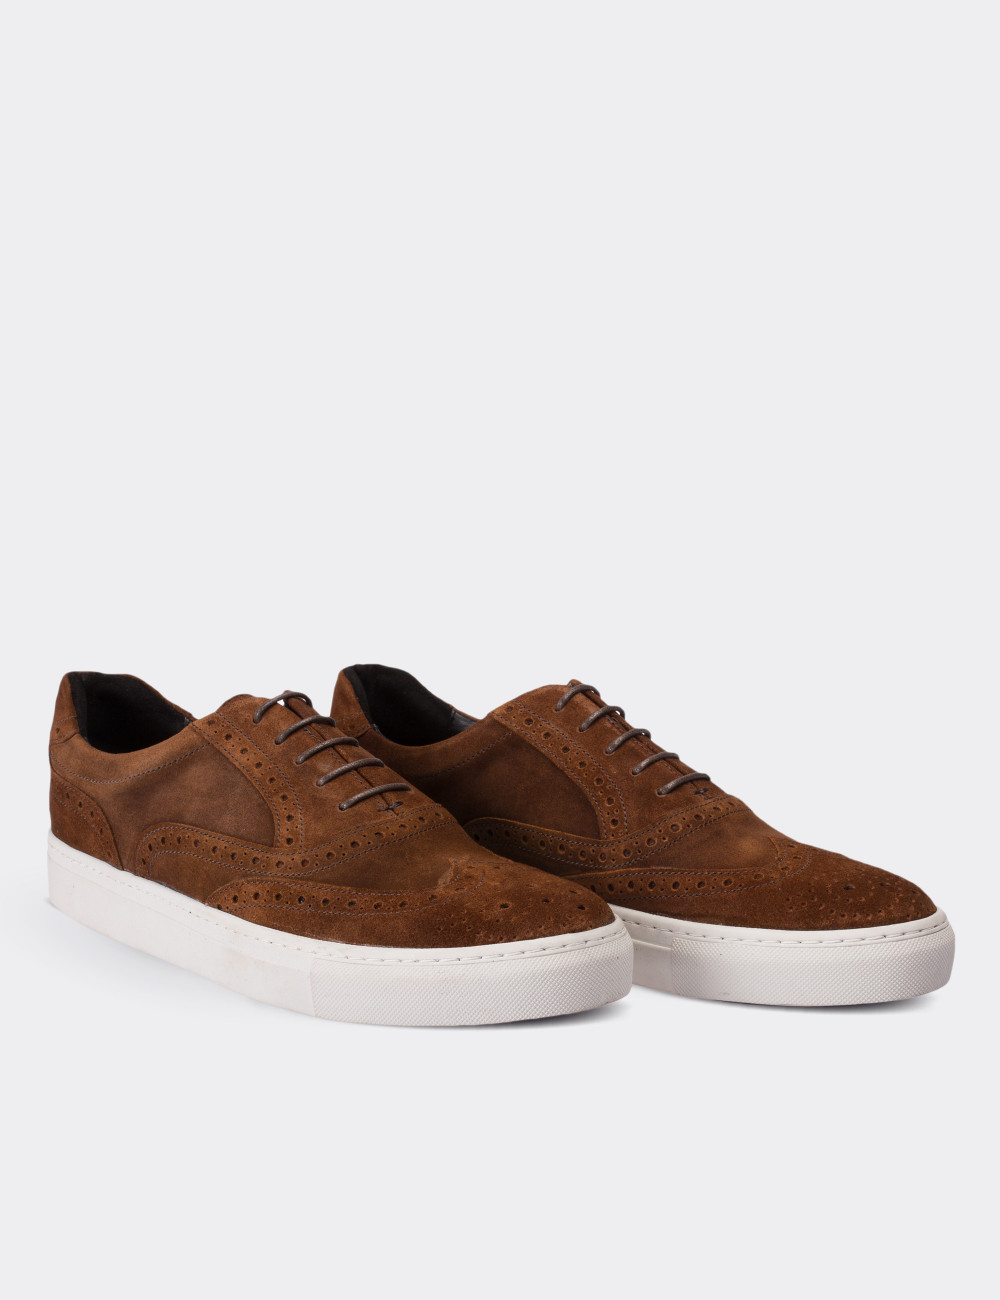 Tan Suede Leather Sneakers - 01637MTBAC02